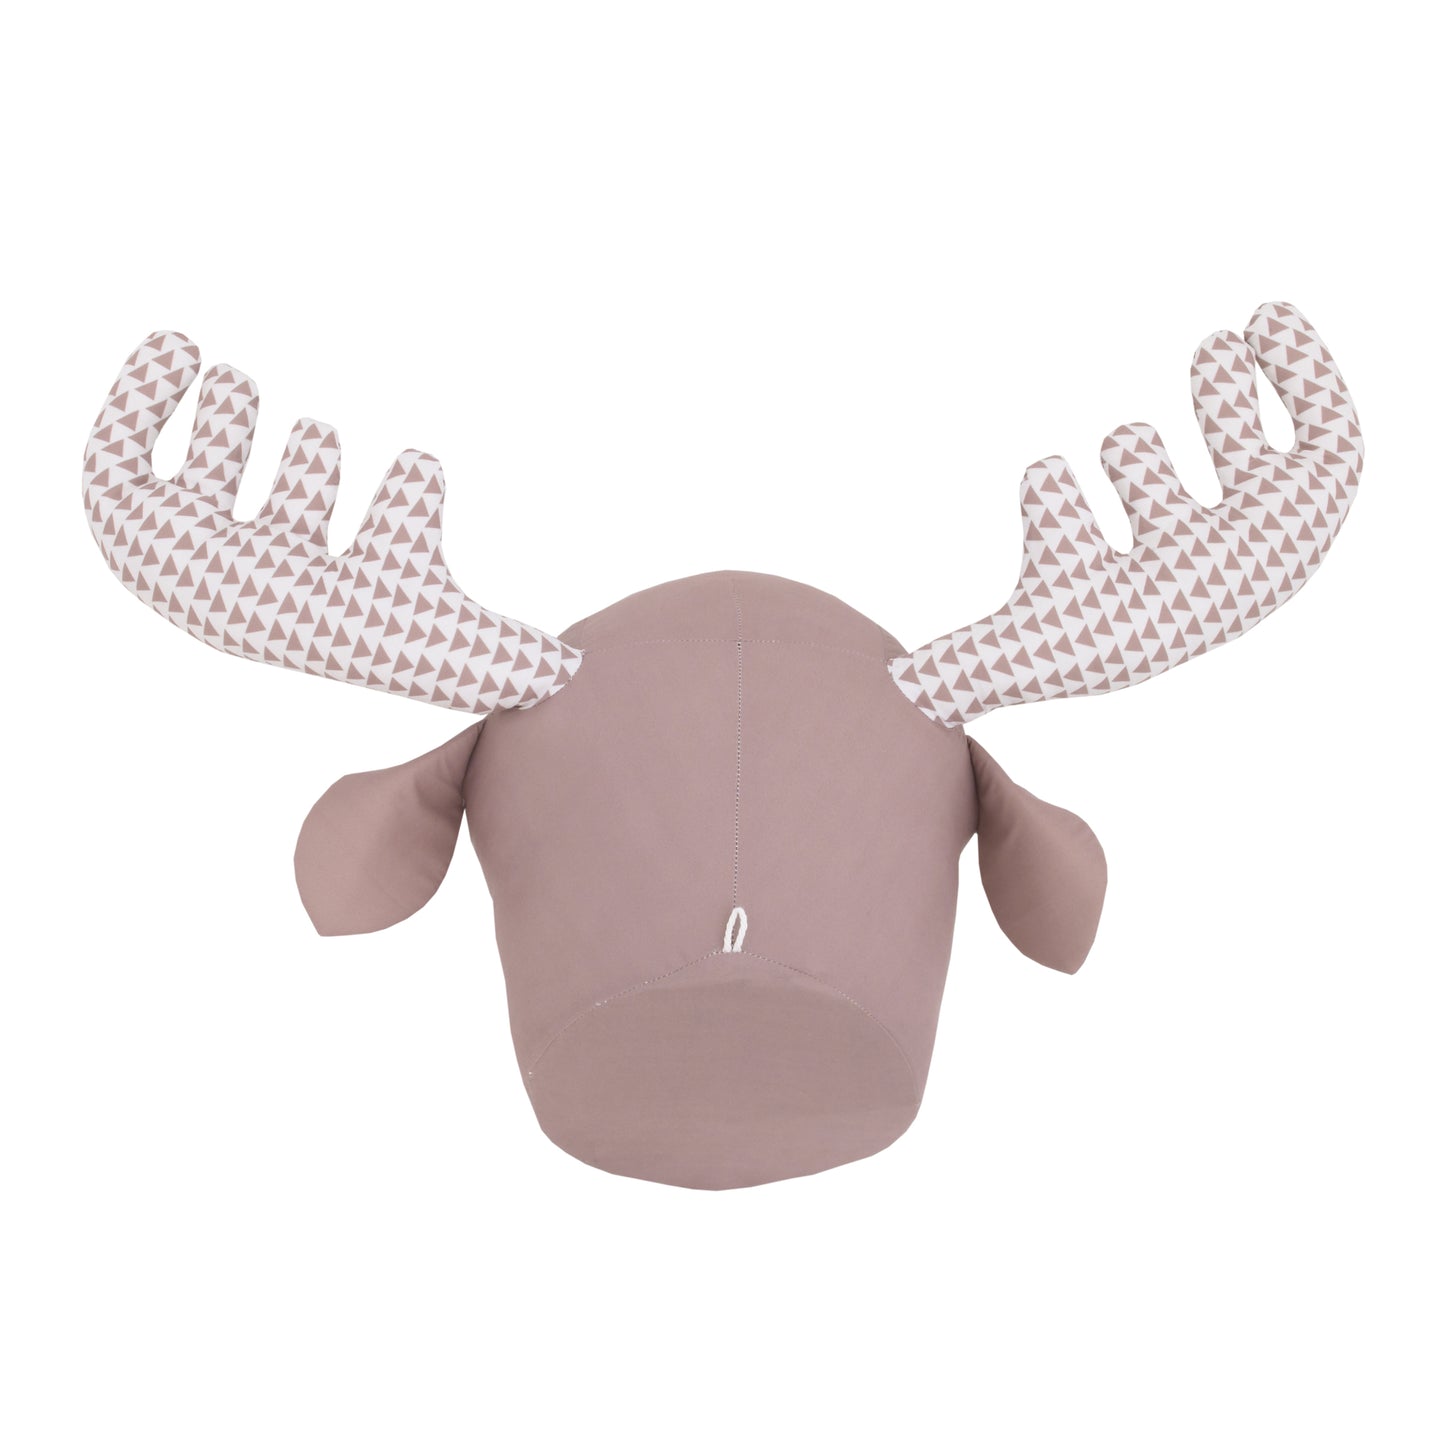 NoJo Brown and White Moose Plush Head Wall Décor